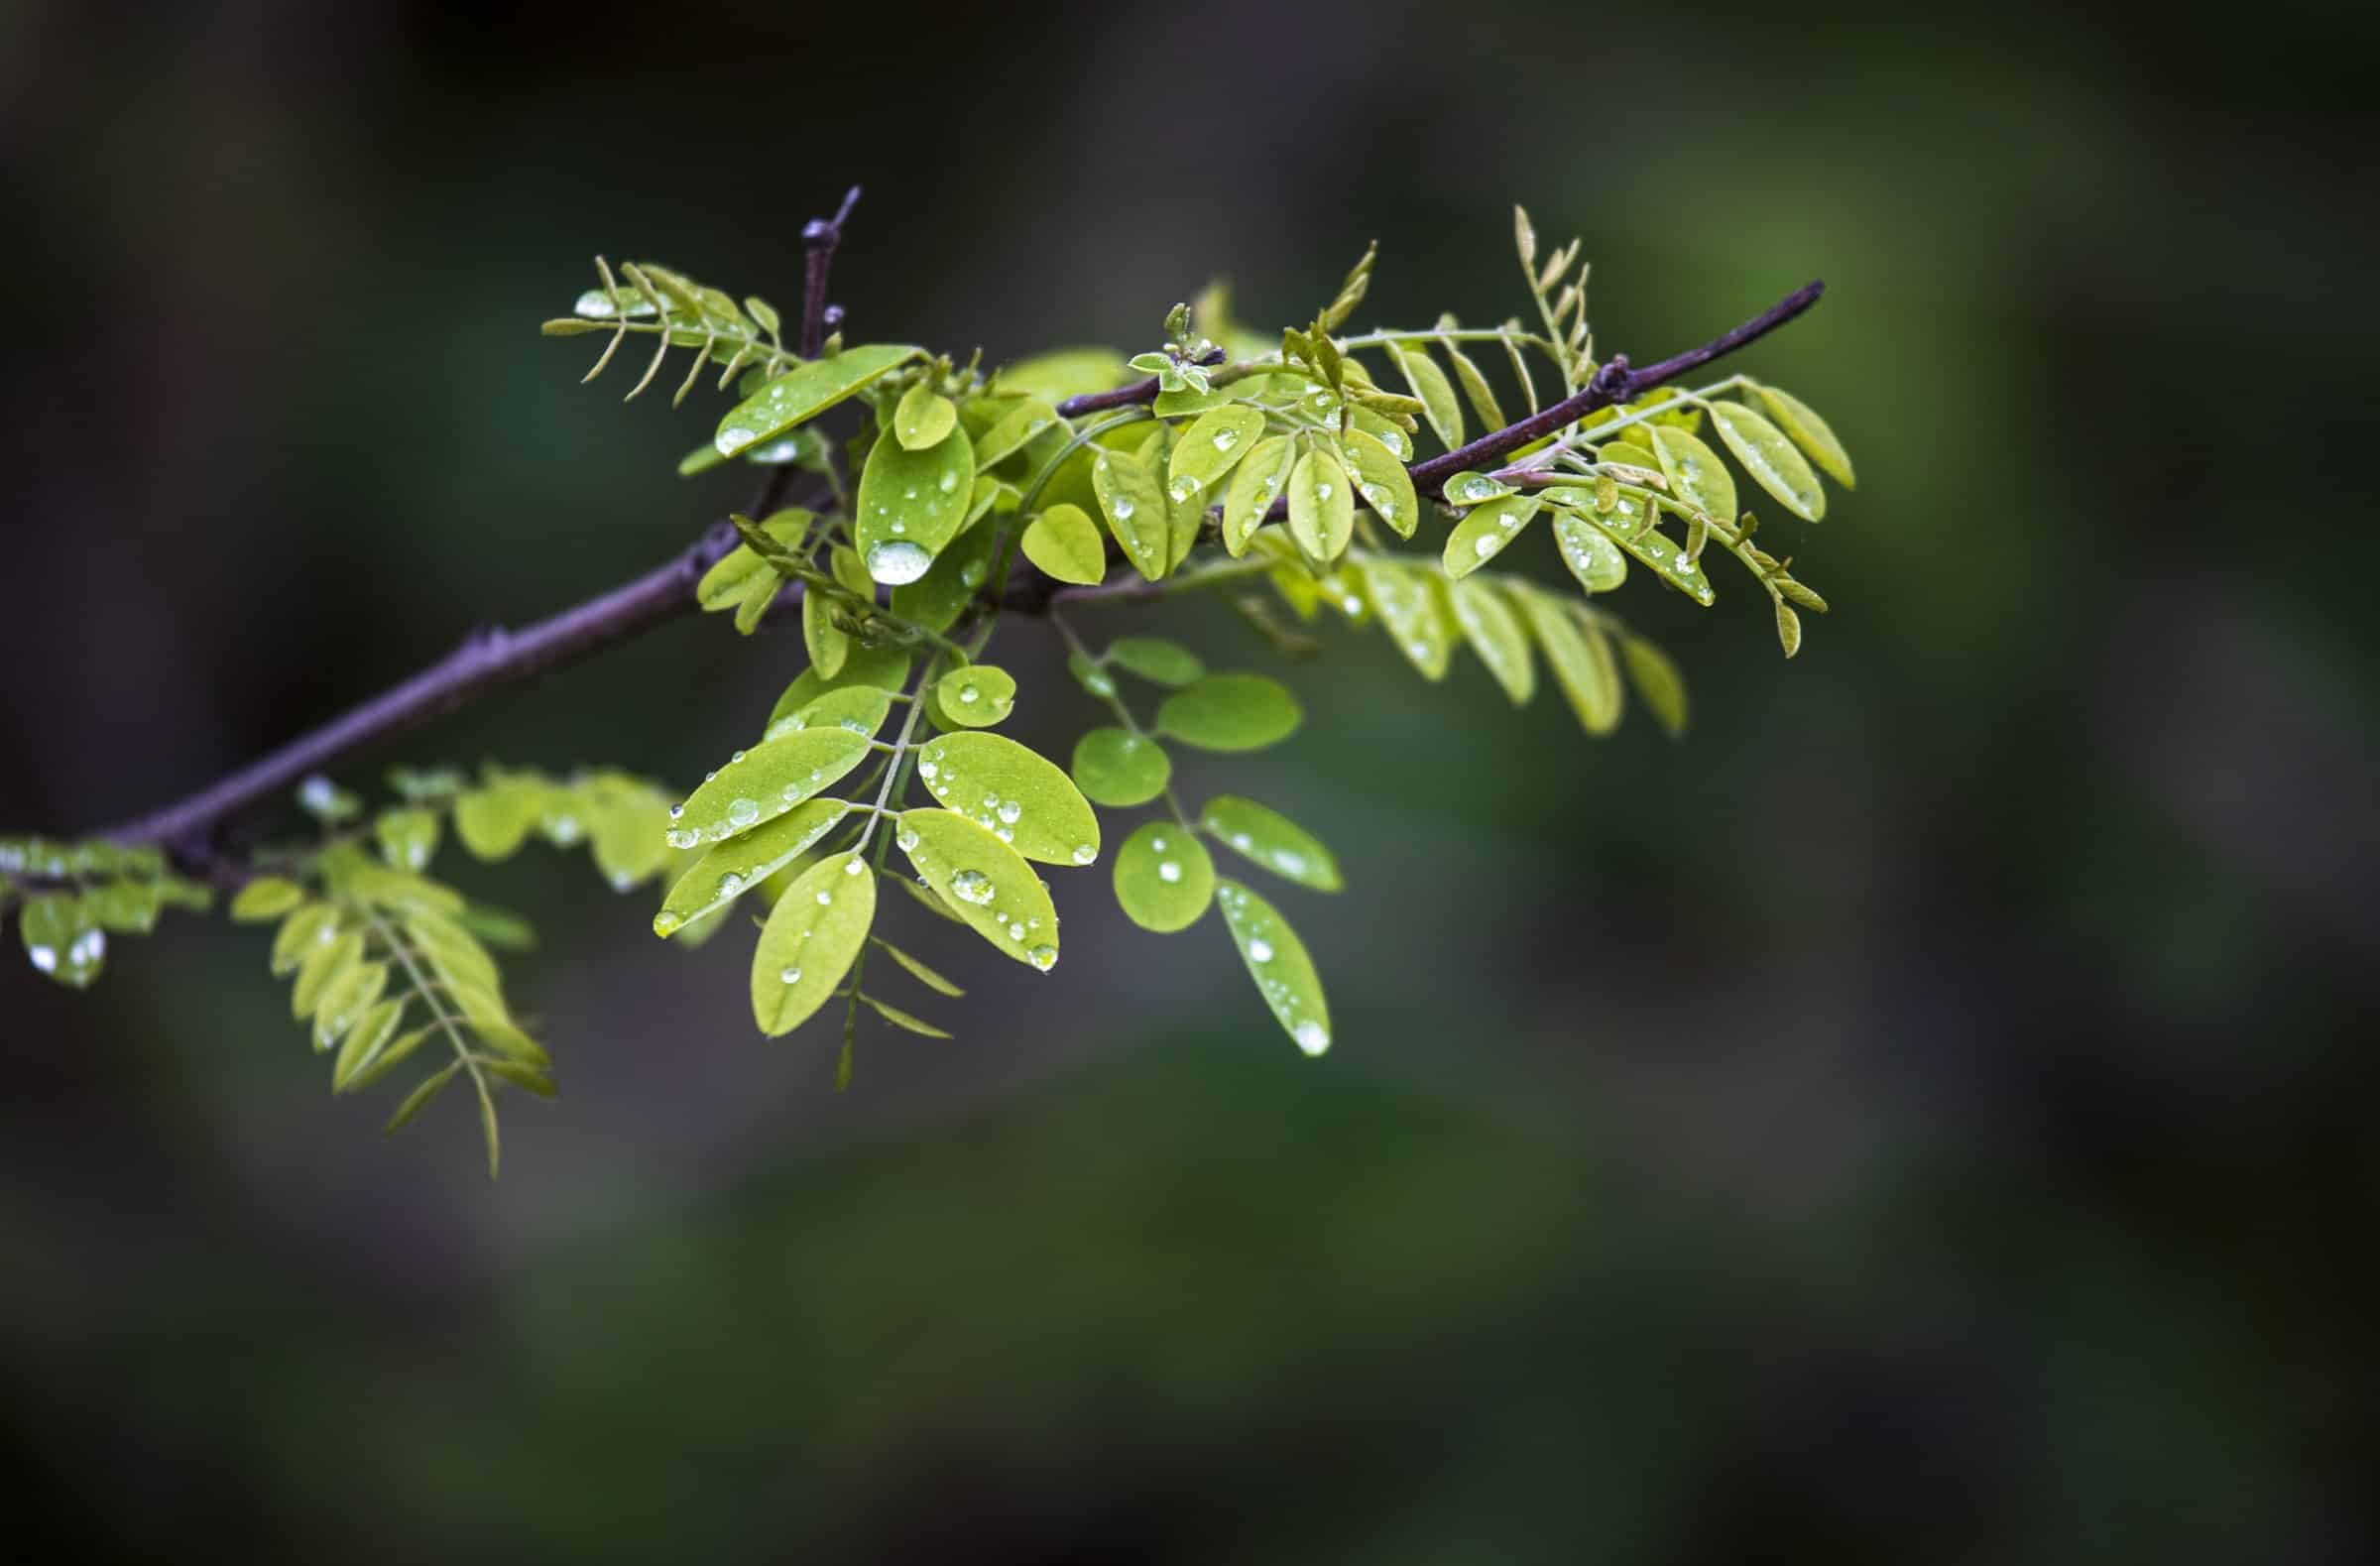 Raindrops bead up on the leaves of a tree branch April 26, 2020, on a trail near Bladensburg, Md. (CNS photo/Chaz Muth)